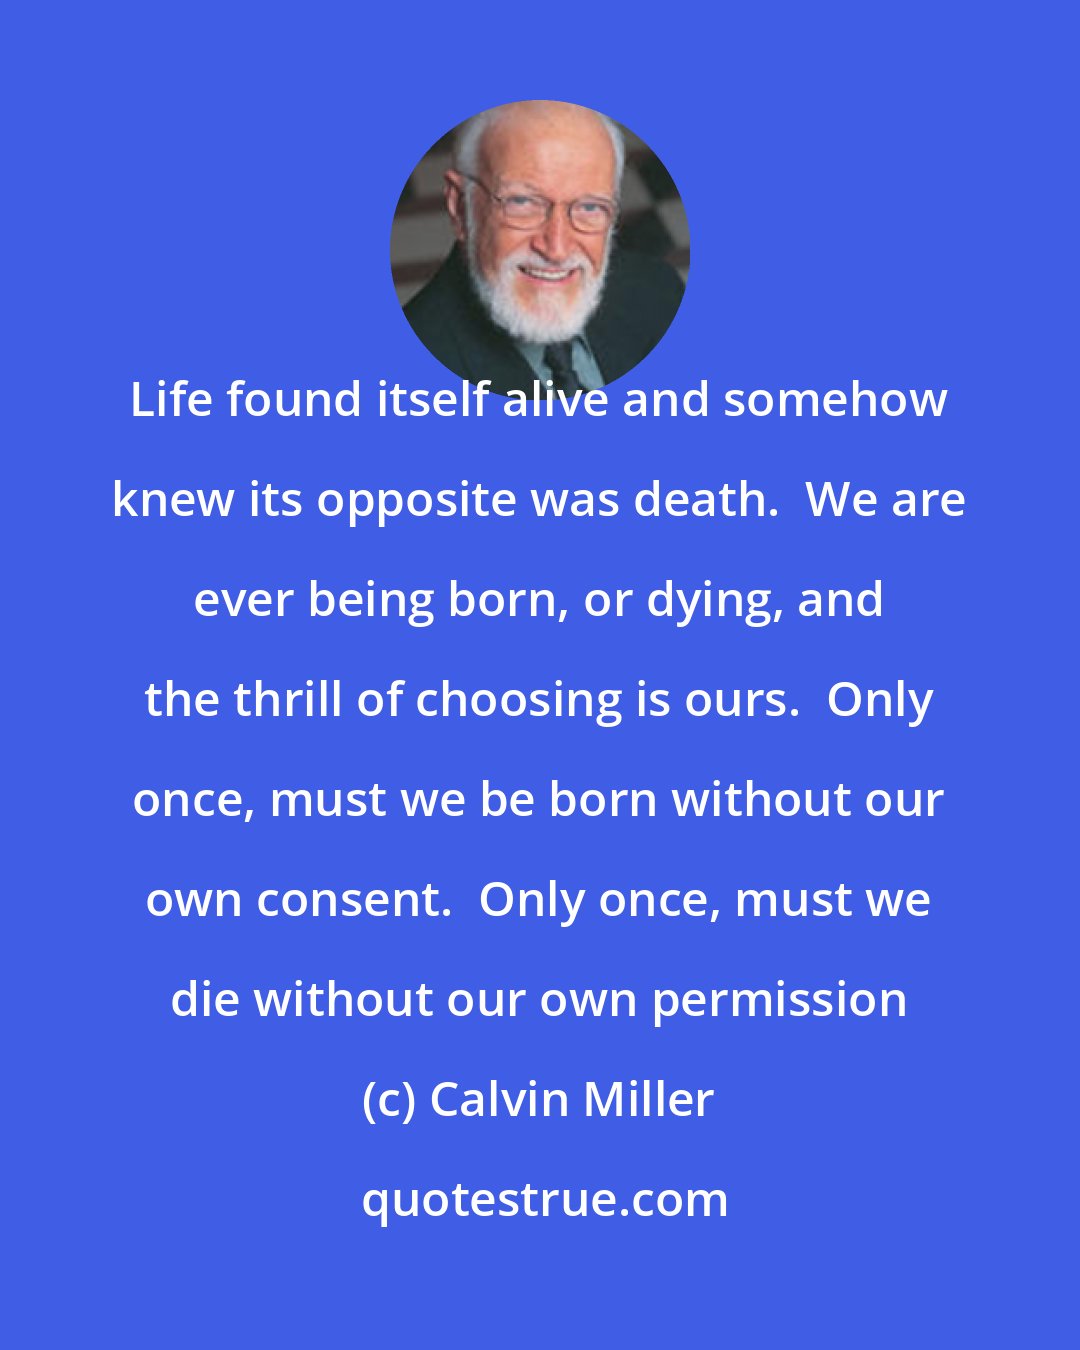 Calvin Miller: Life found itself alive and somehow knew its opposite was death.  We are ever being born, or dying, and the thrill of choosing is ours.  Only once, must we be born without our own consent.  Only once, must we die without our own permission